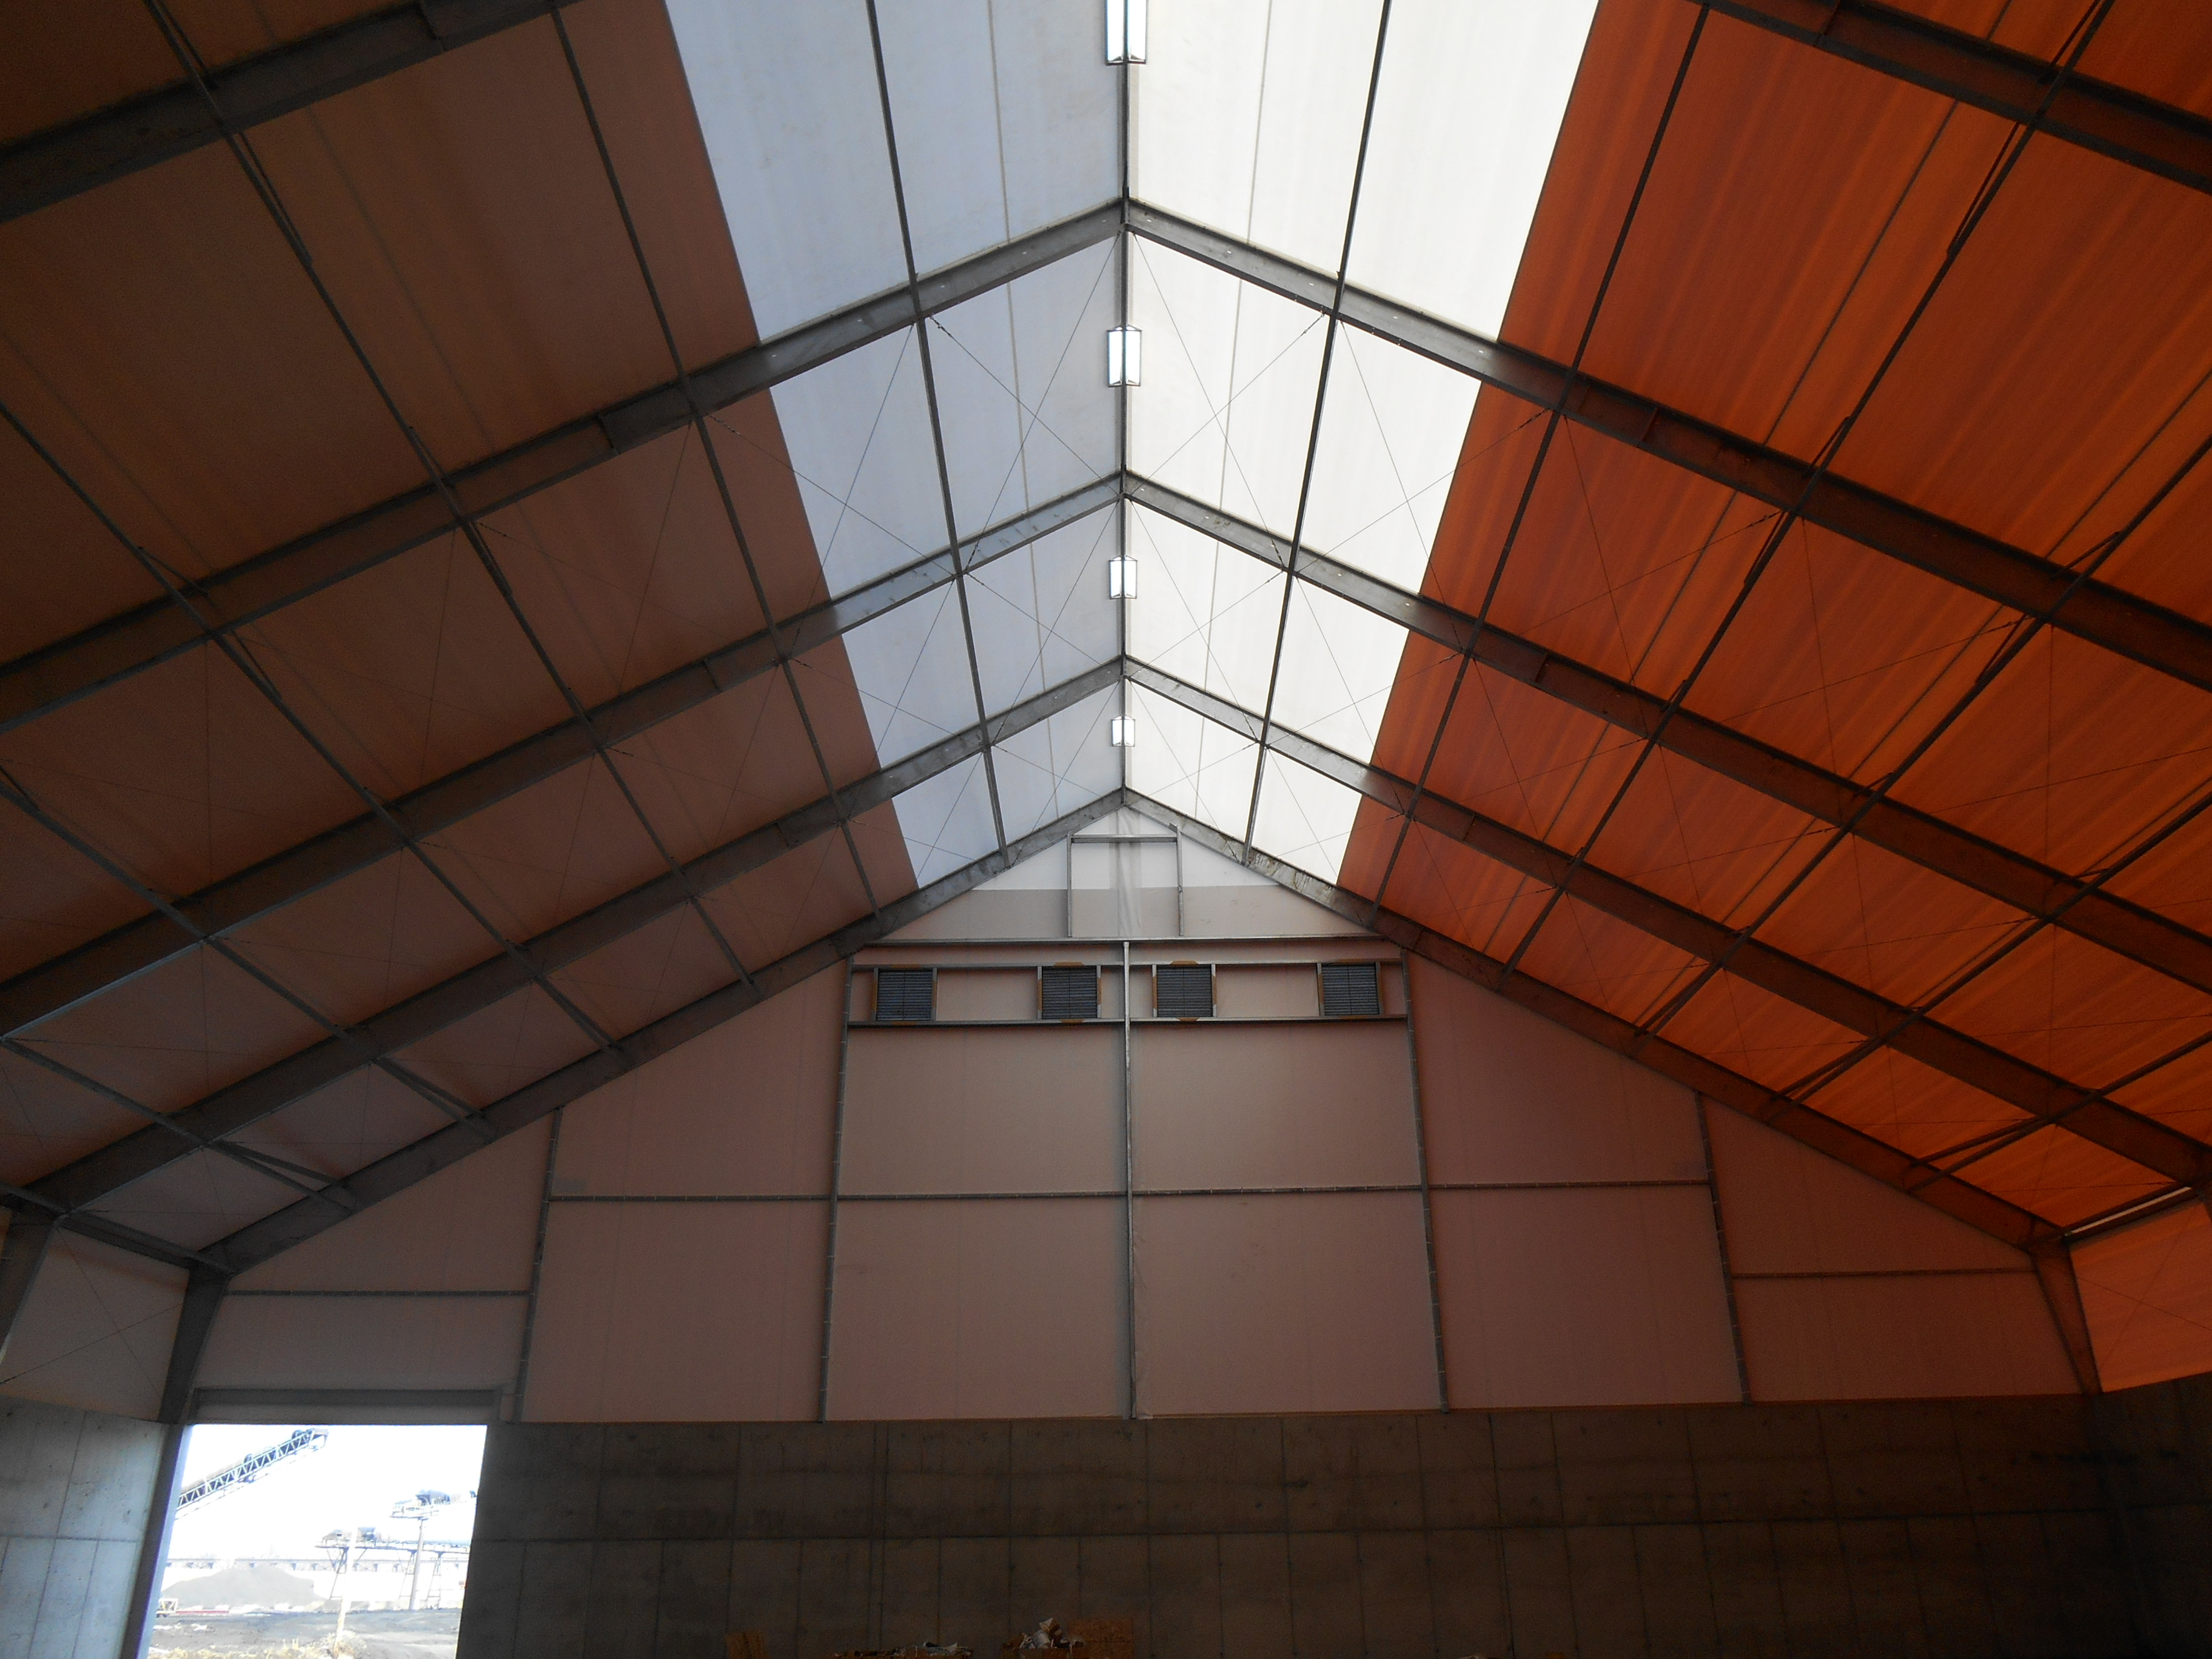 Check out the skylight inside this tension fabric structure used for bulk storage at a river terminal.